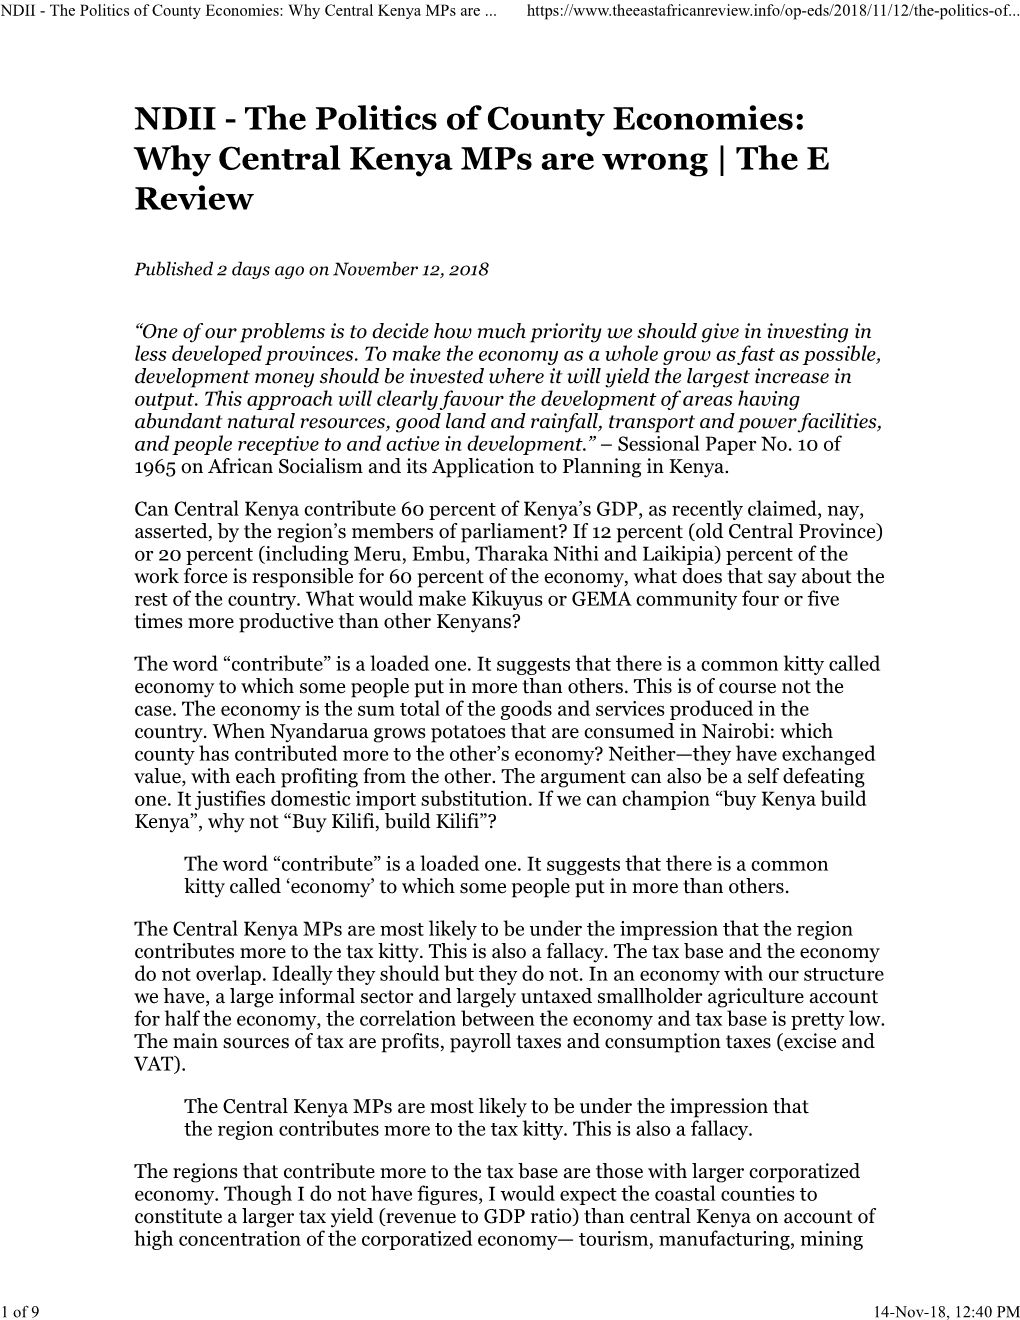 NDII - the Politics of County Economies: Why Central Kenya Mps Are